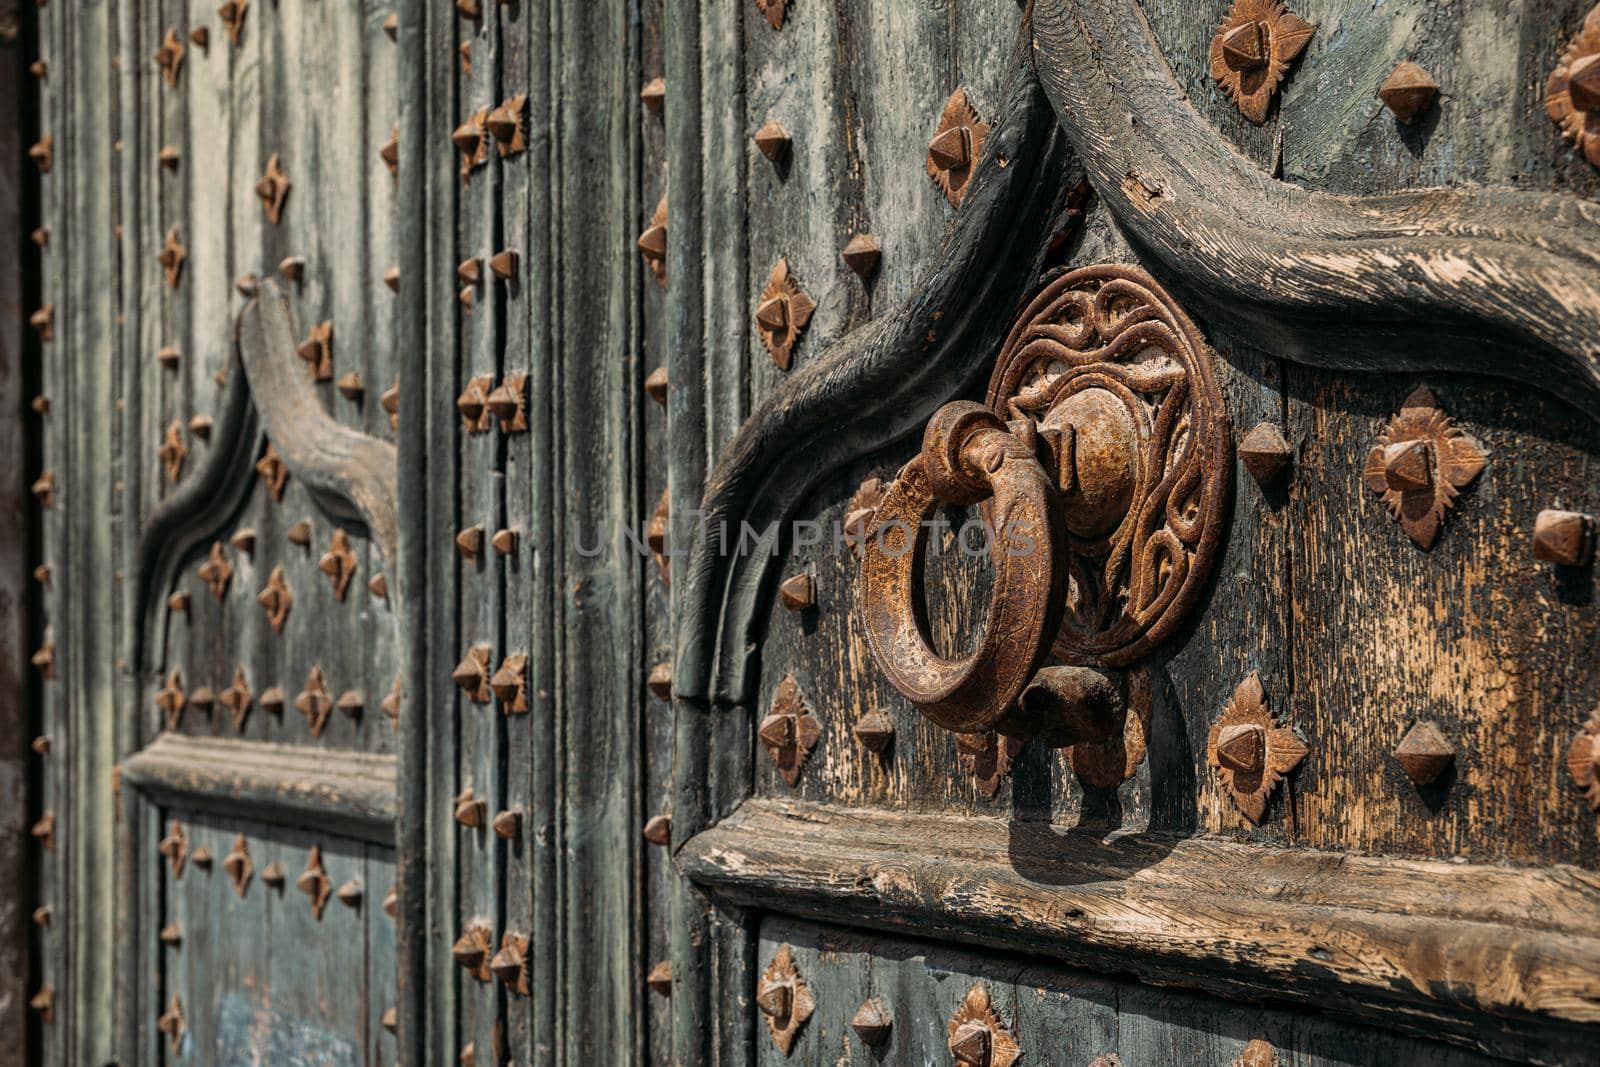 Details of portal to Cathedral. Metal knocker on wrought iron reinforced old wooden doors to Girona Cathedral, Spain by apavlin